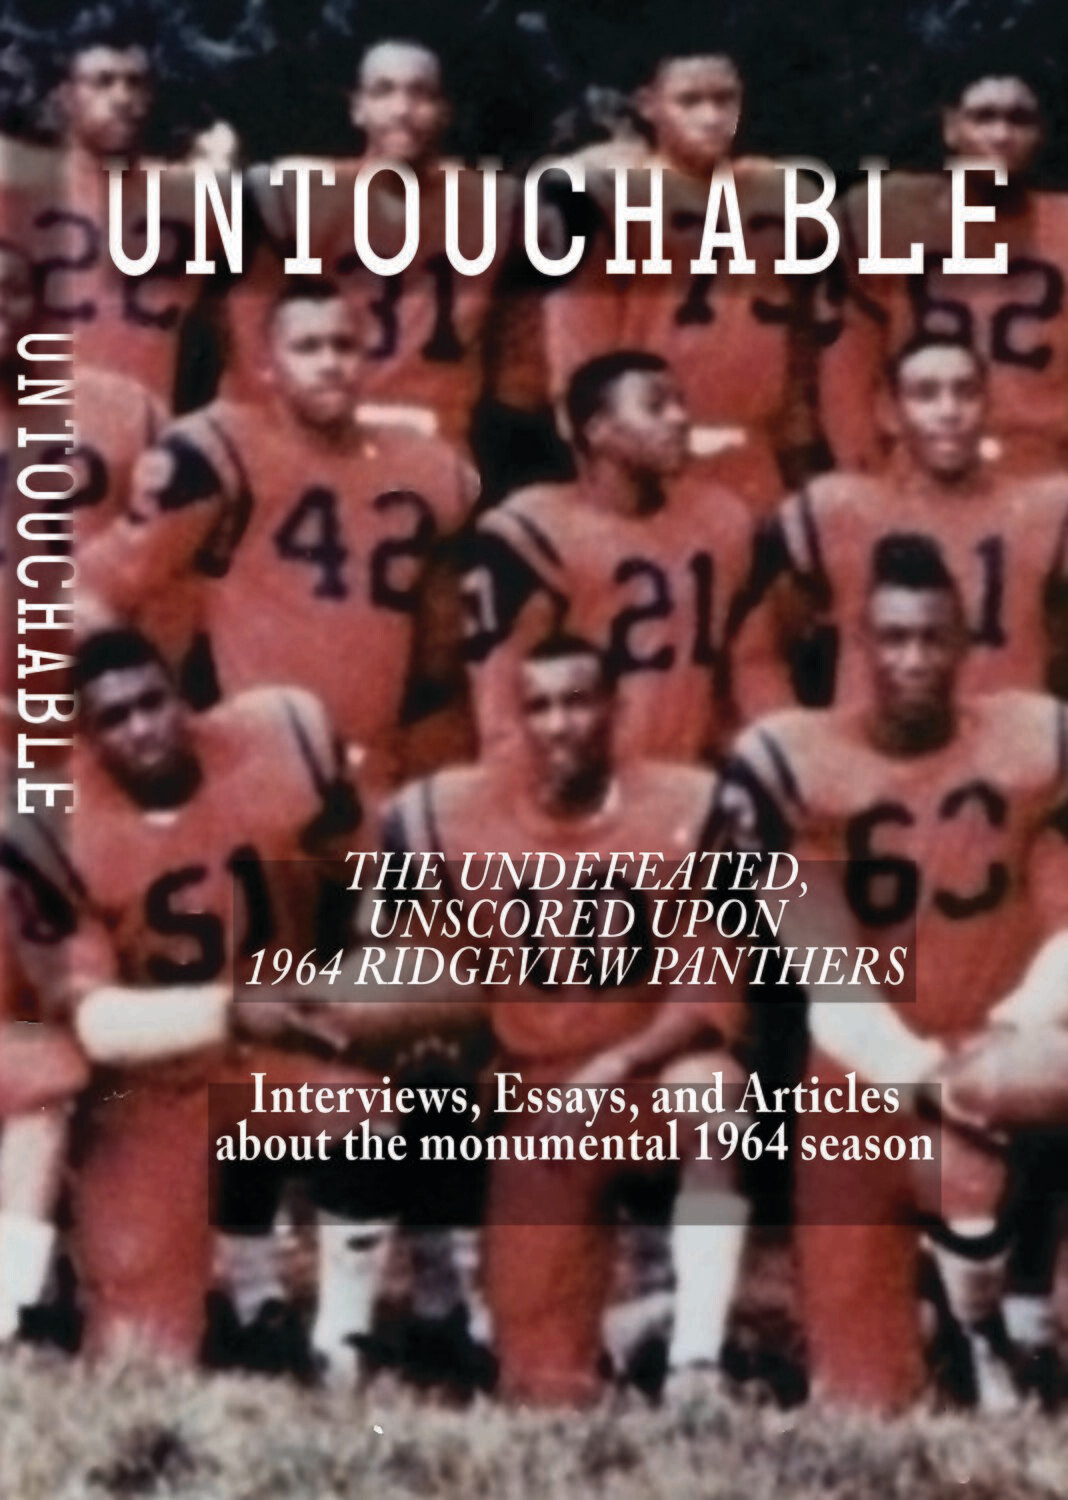 Untouchable: The Undefeated, Unscored Upon 1964 Ridgeview Panthers